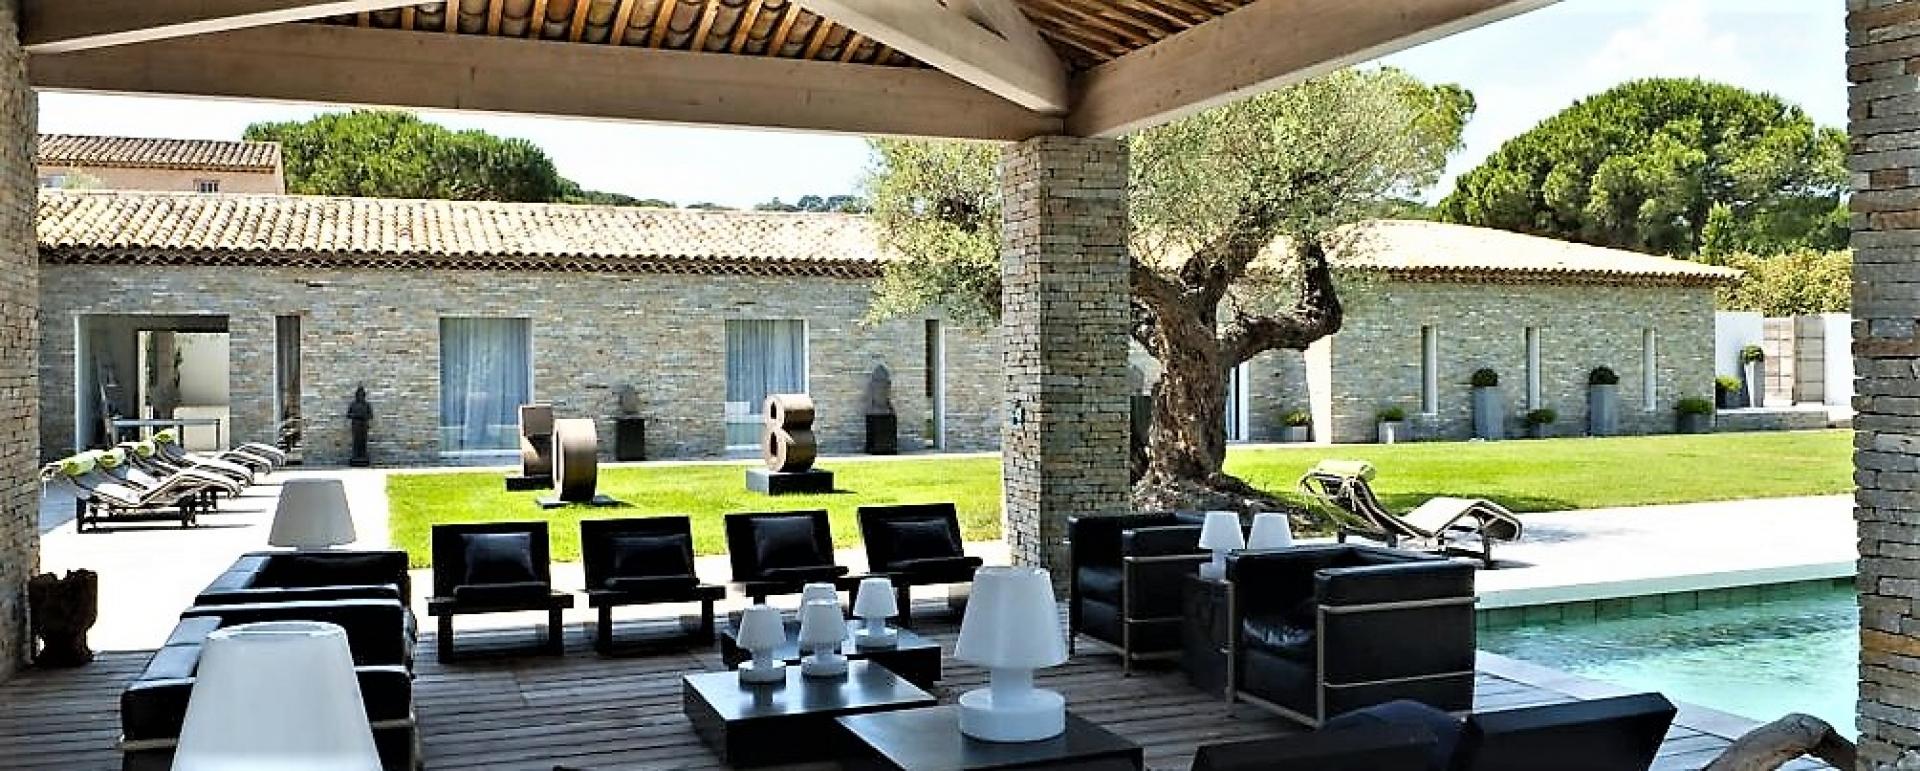 THE TERRACE CLOSE TO THE SWIMMING POOL IN VILLA LOVE